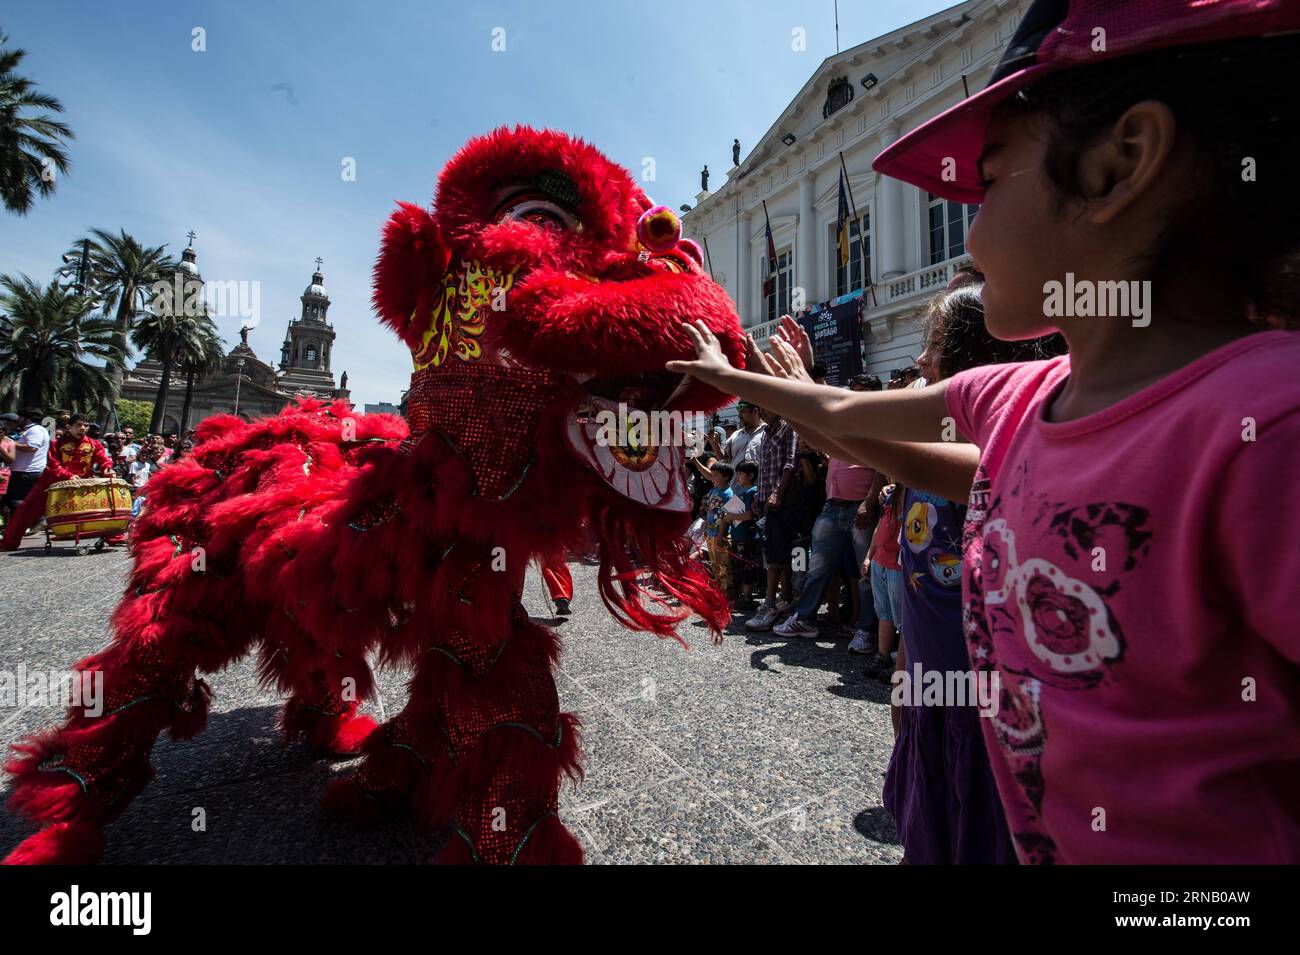 Children interact with a Chinese lion during the Chinese Lunar New Year and the Feast of Santiago celebrations, at the Plaza de Armas in Santiago, capital of Chile, on Feb. 12, 2016. Feast of Santiago celebrates the 475th anniversary of the founding of the Chilean capital of Santiago by Pedro de Valdivia. Jorge Villegas) (jg) (fnc) CHILE-SANTIAGO-CHINA-LUNAR NEW YEAR e JORGExVILLEGAS PUBLICATIONxNOTxINxCHN   Children interact With a Chinese Lion during The Chinese Lunar New Year and The Feast of Santiago celebrations AT The Plaza de Armas in Santiago Capital of Chile ON Feb 12 2016 Feast of Sa Stock Photo